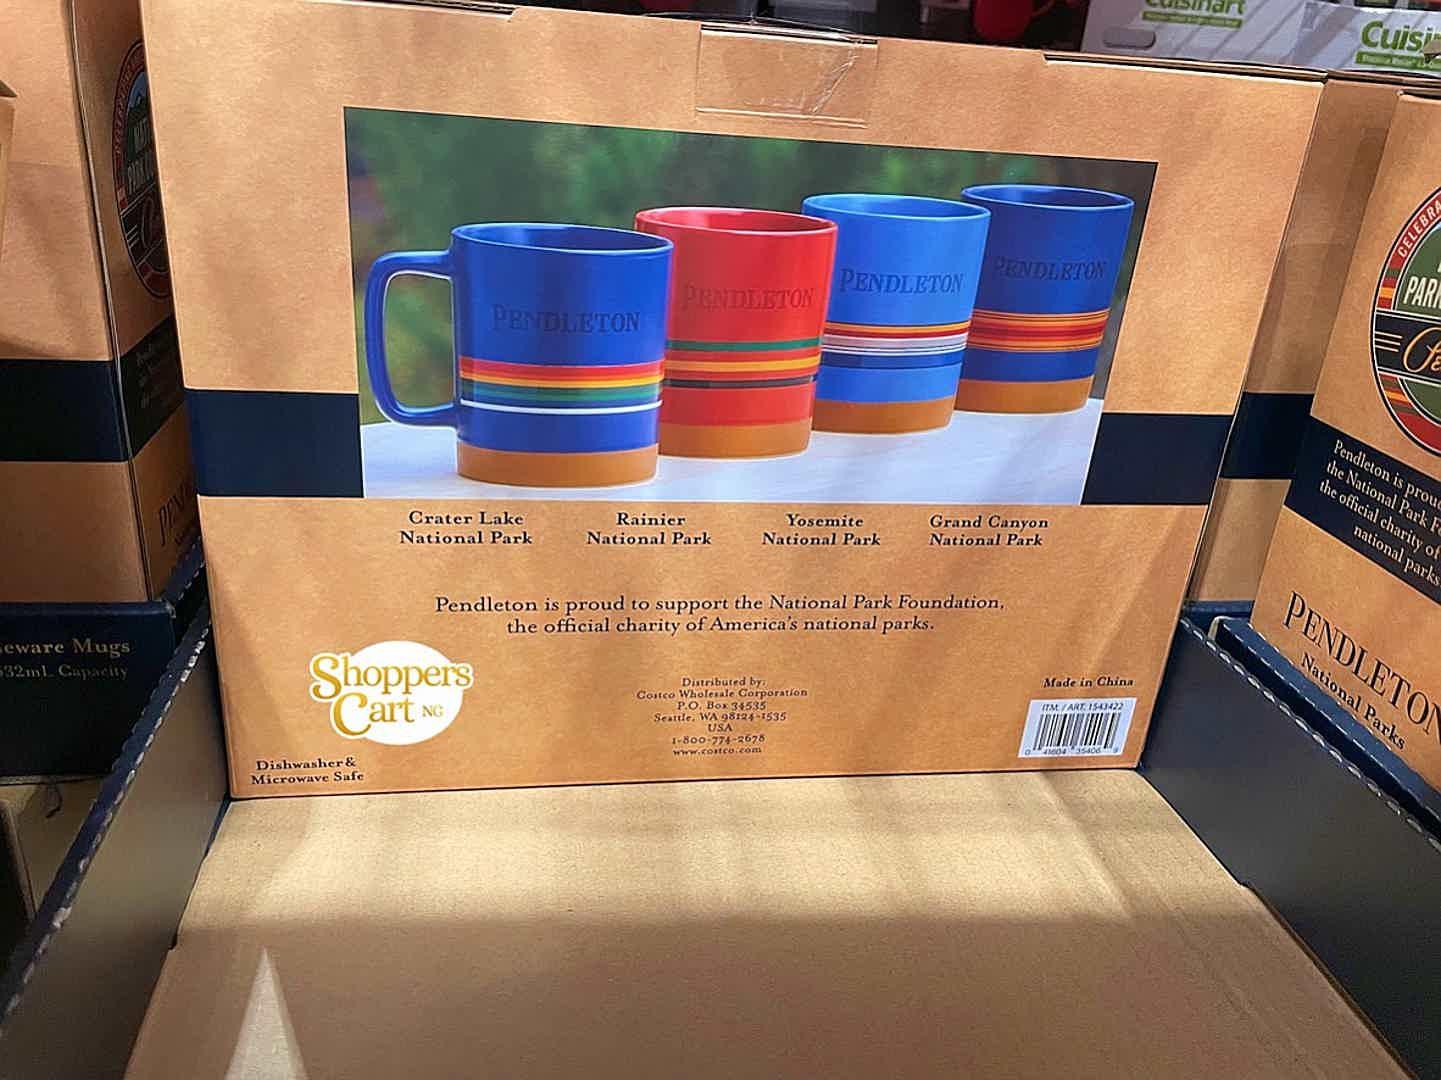 Pendleton Stoneware mugs and Stanley x Pendleton vacuum bottles. All are  National Parks themed. Found at my local (Kirkland) Costco for 19.99 each.  Easy early Christmas gift pickup! : r/Costco